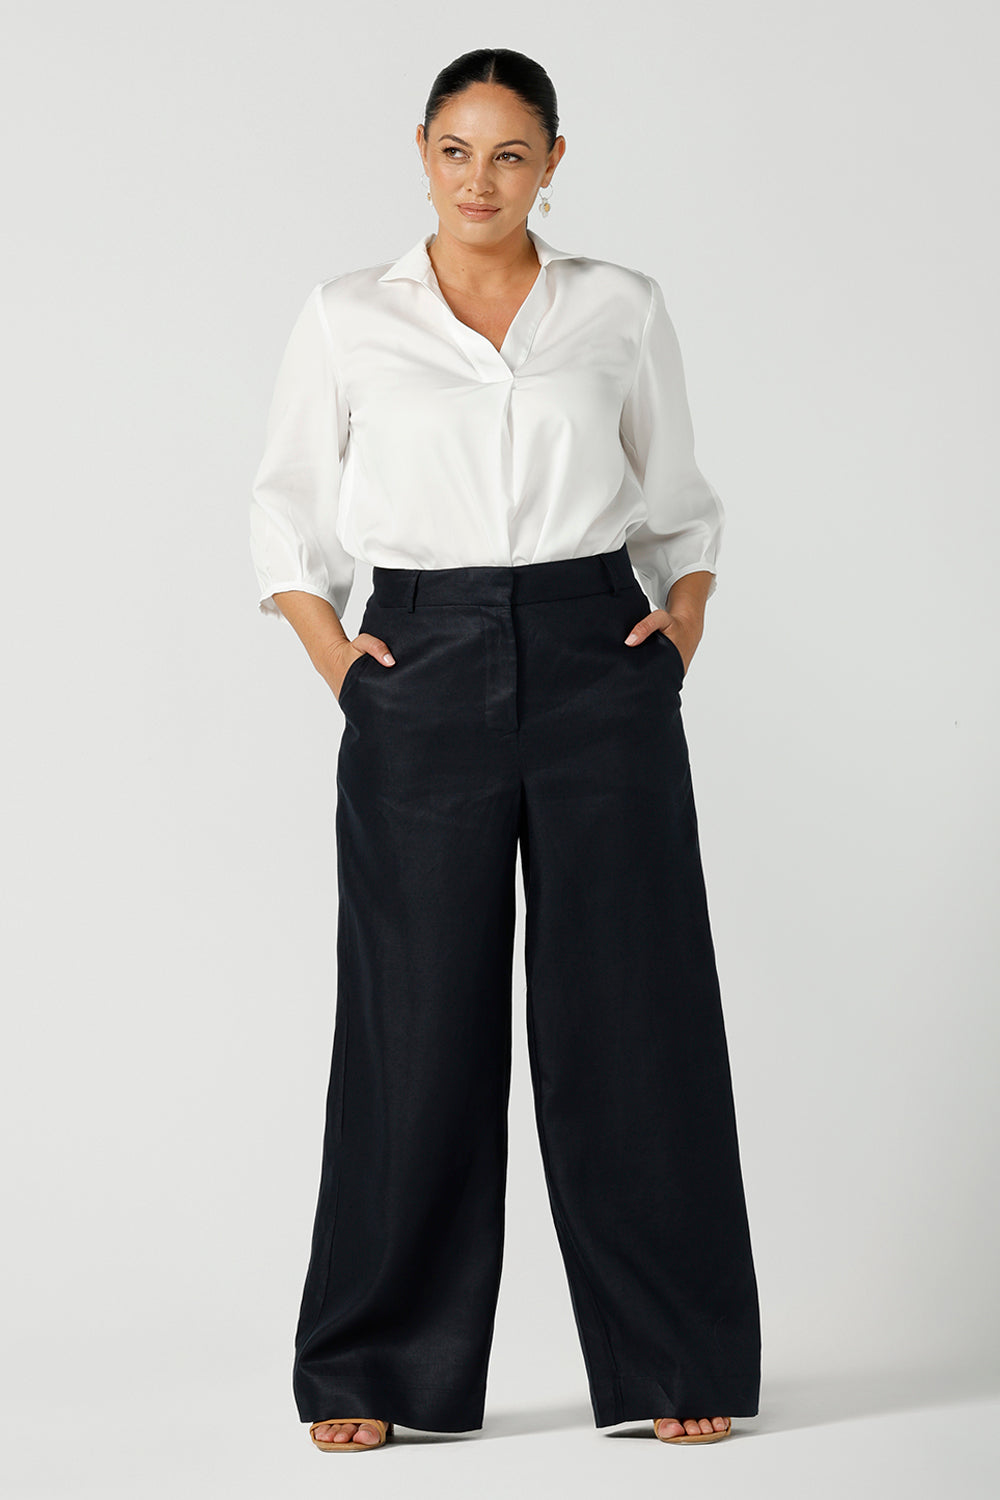 PALM SPRINGS Soft Leg Jersey Pants | Made in Melbourne - Lisa Barron